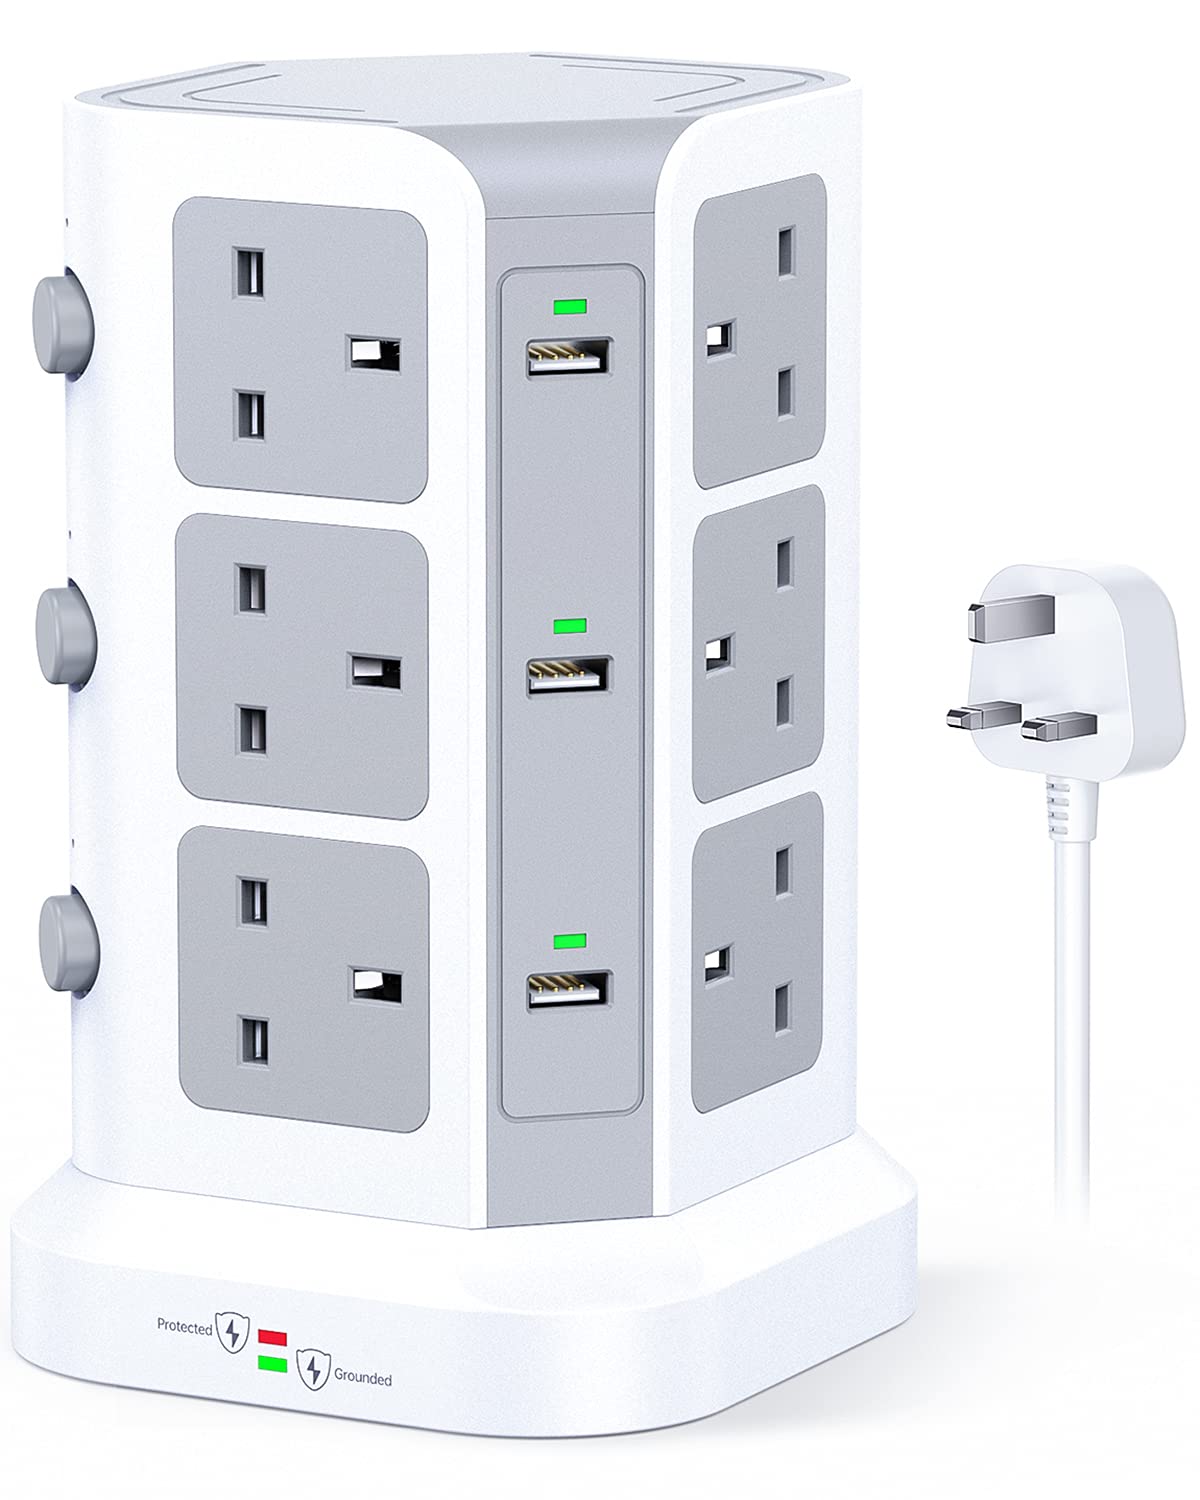 If you are using a power strip or surge protector, unplug it from the wall outlet.
Wait for approximately 30 seconds before plugging it back in.